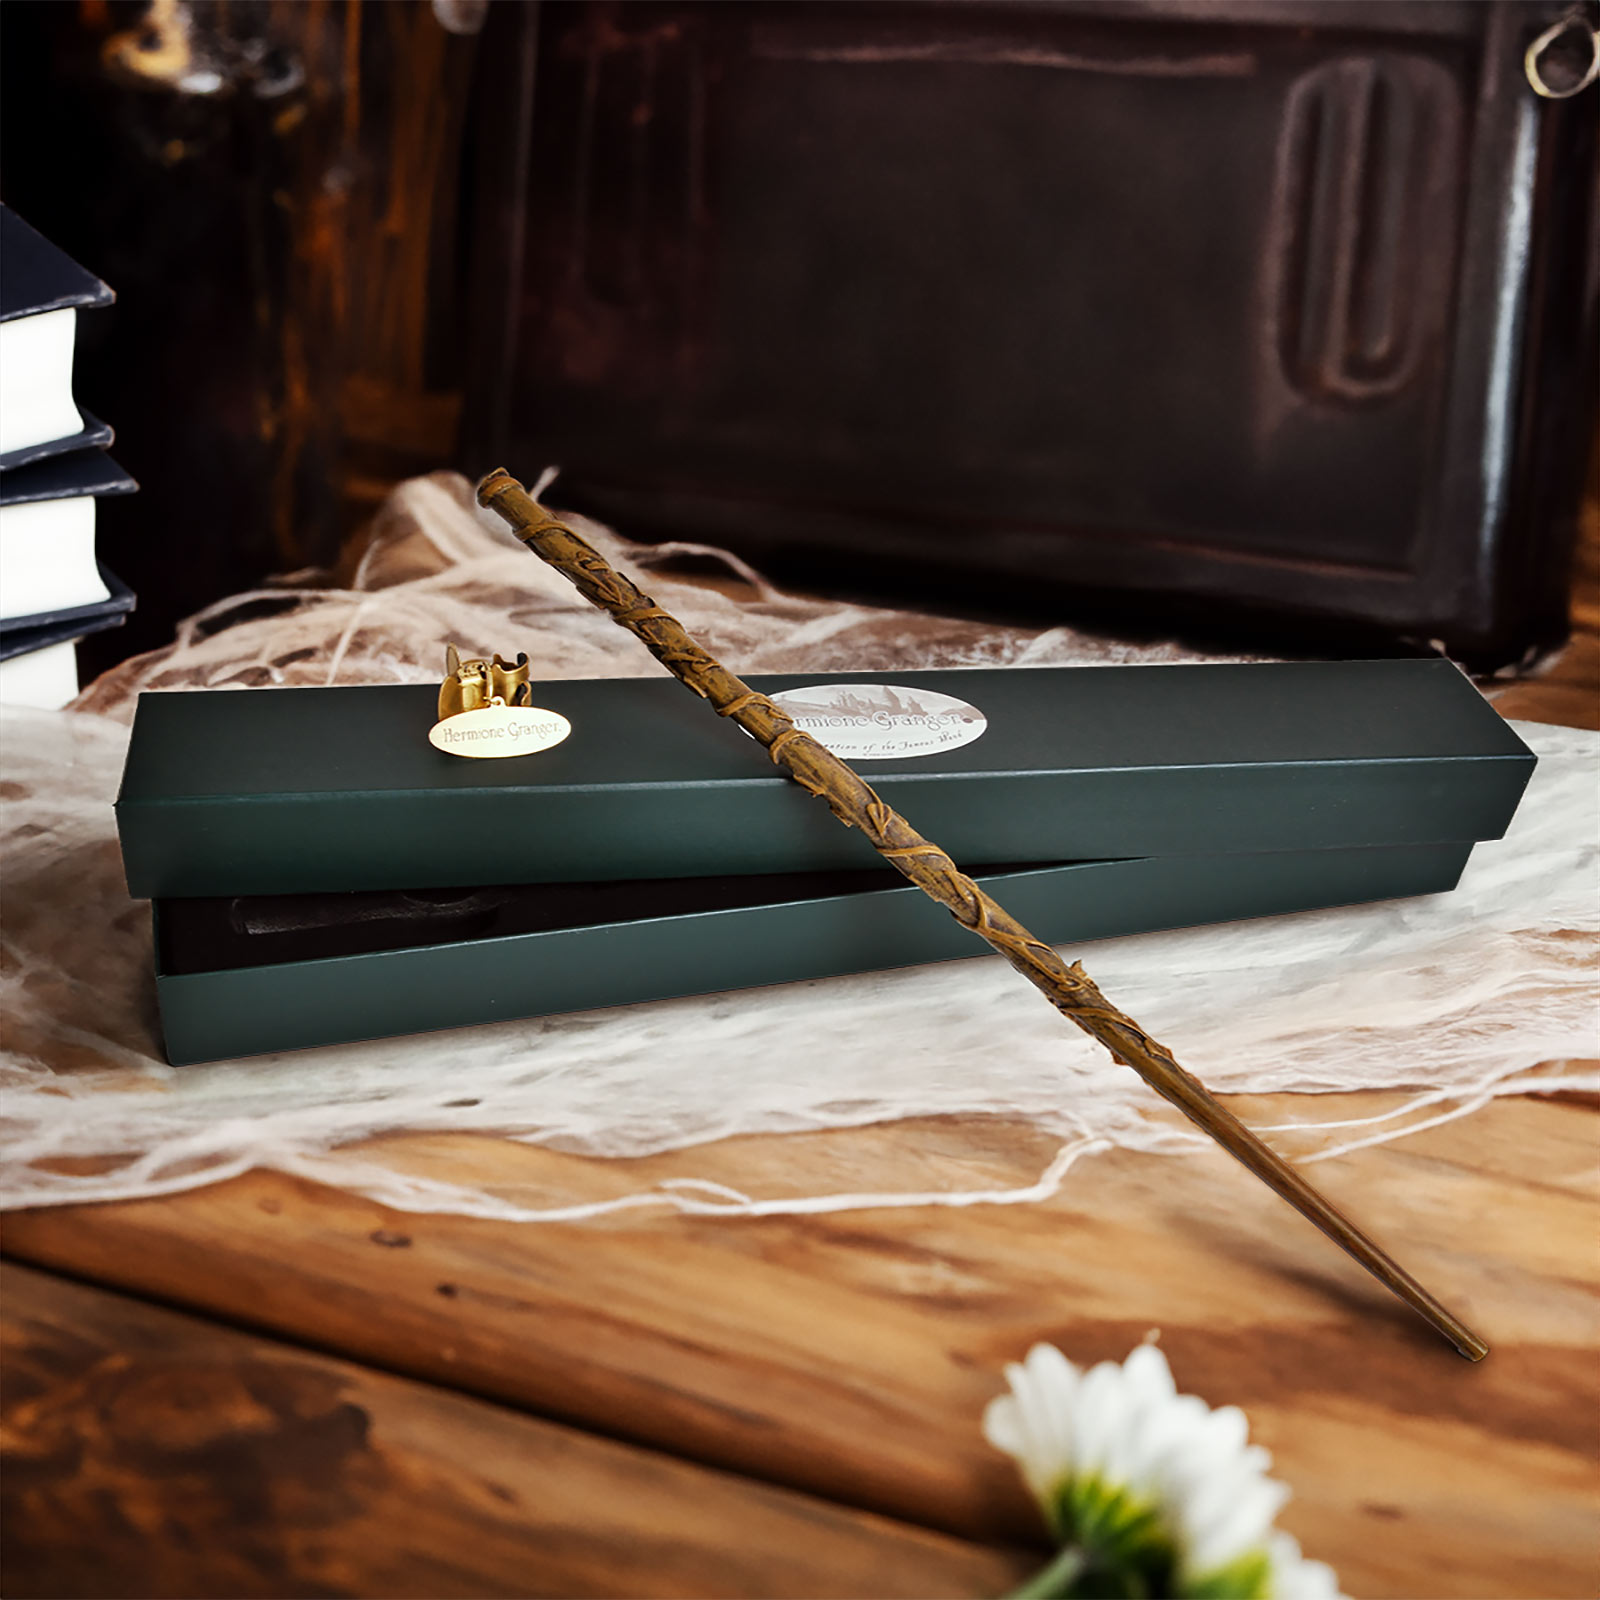 Hermione Granger Wand - Character Edition